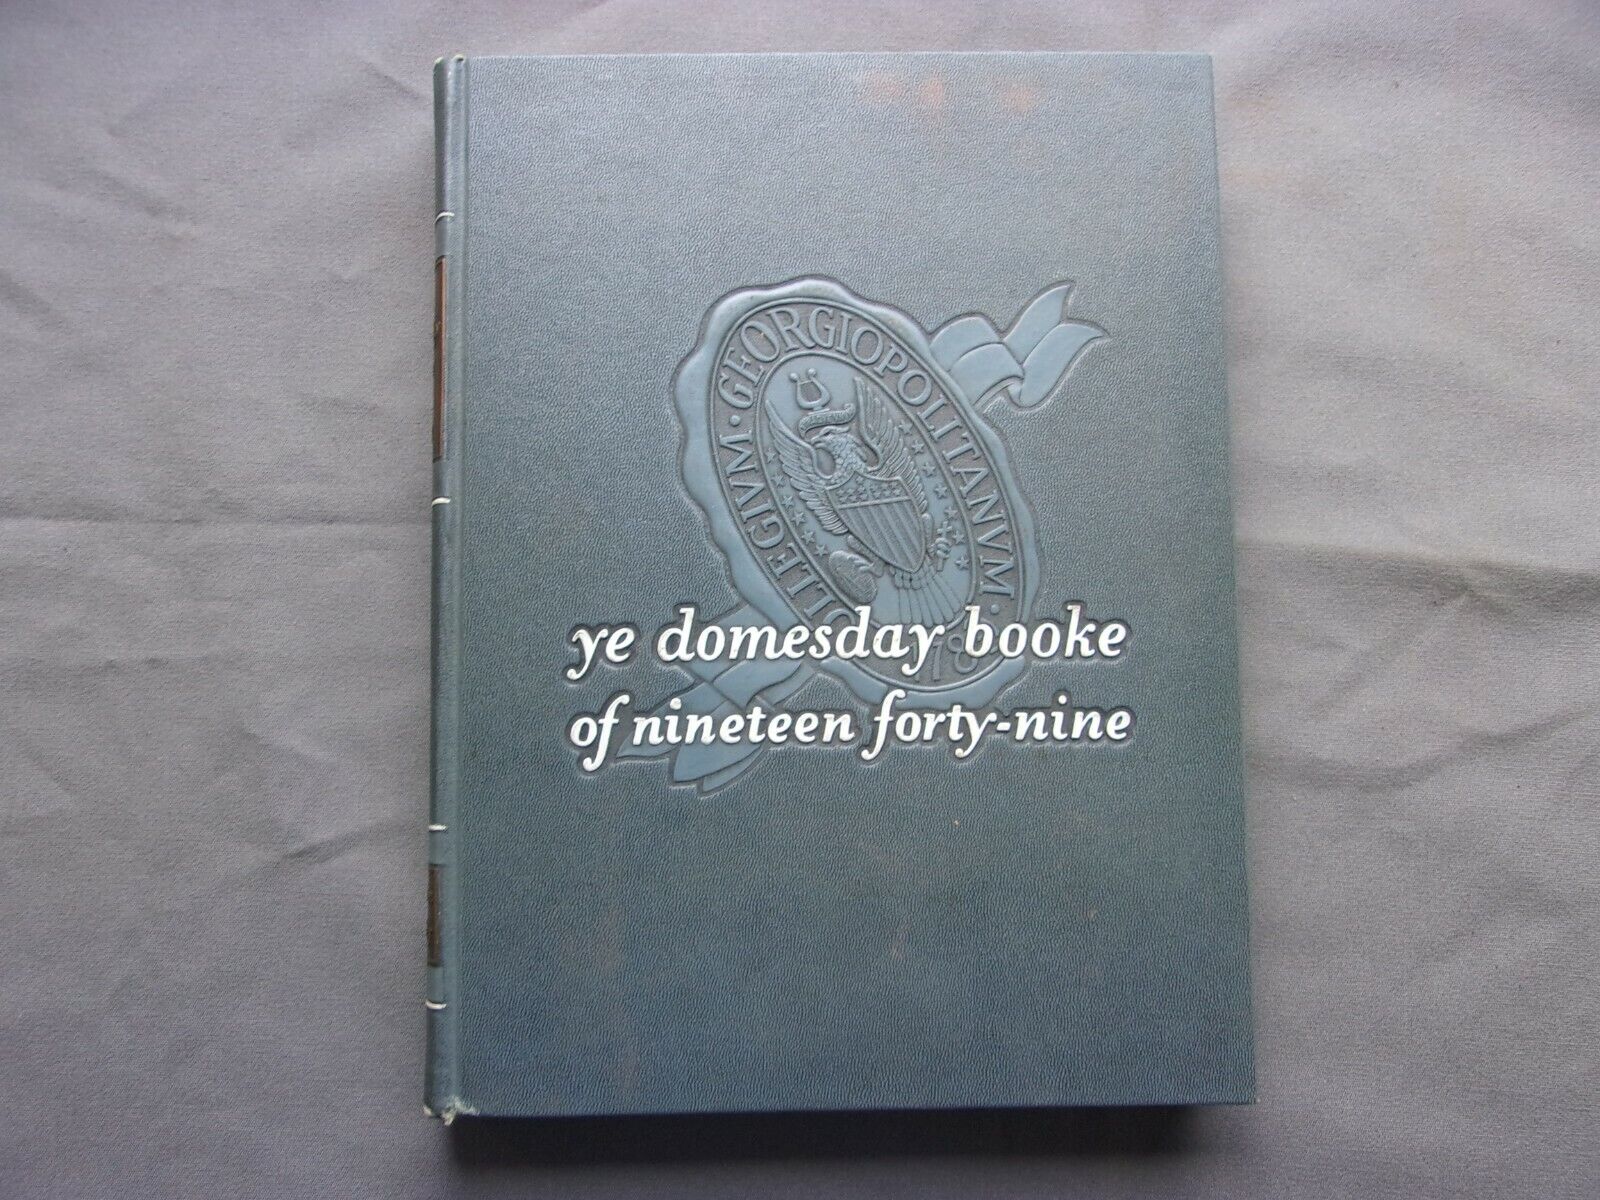 Vintage Yearbook Annual Georgetown University Ye Domesday Booke 1949 49 DC